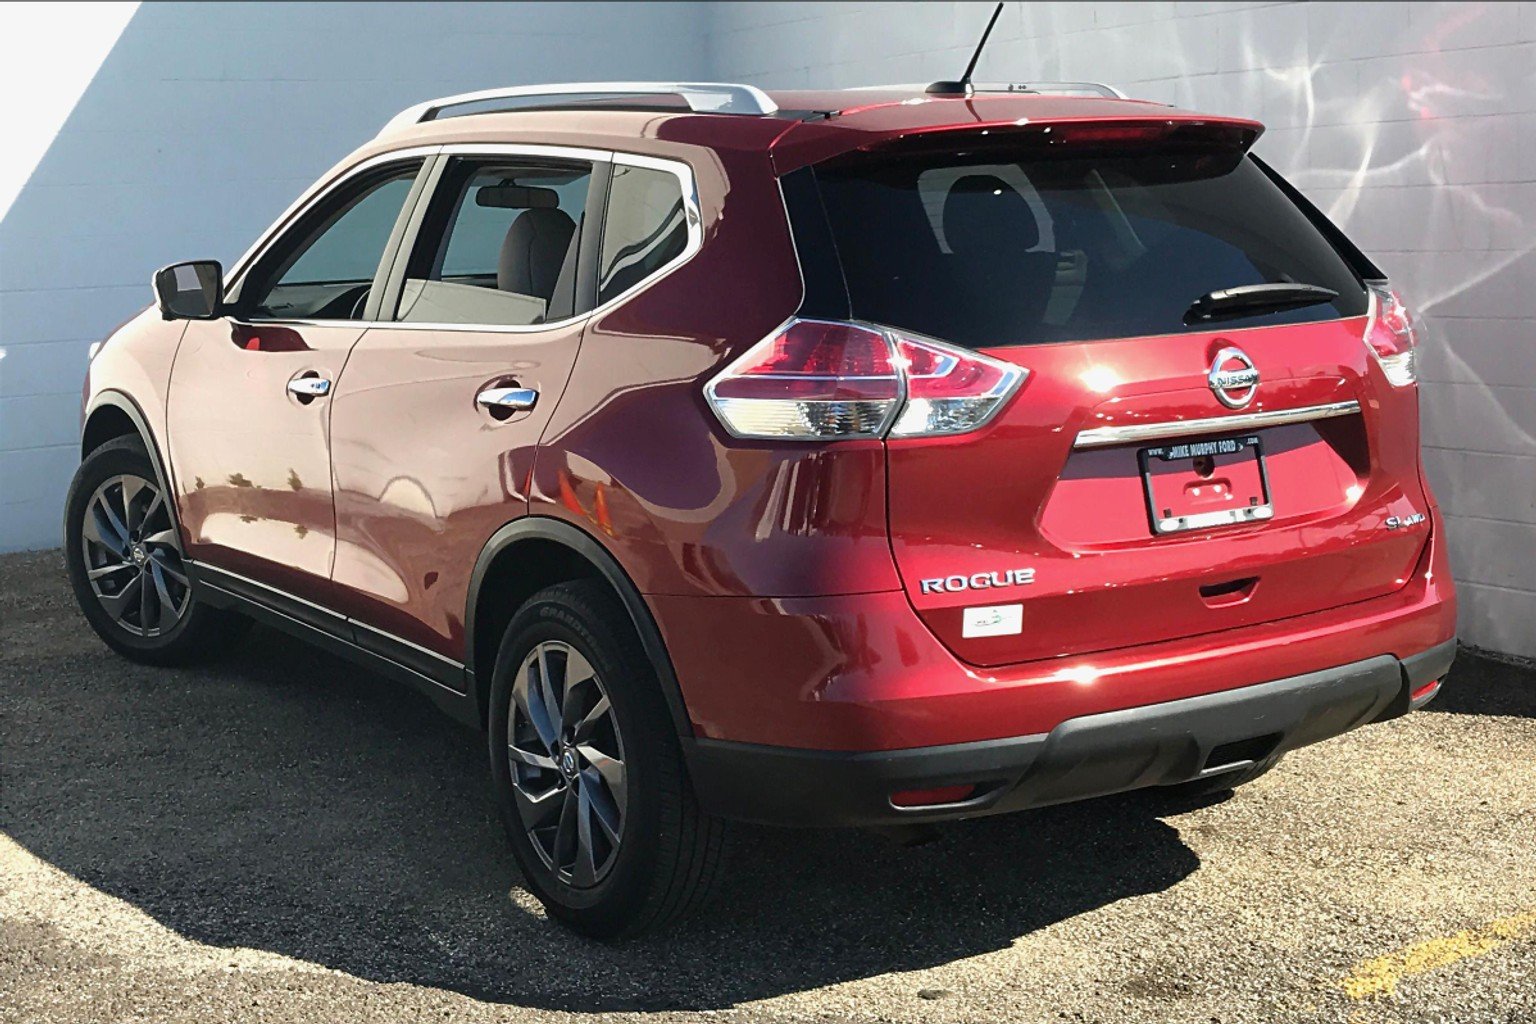 pre-owned-2016-nissan-rogue-awd-4dr-sl-sport-utility-in-morton-771321